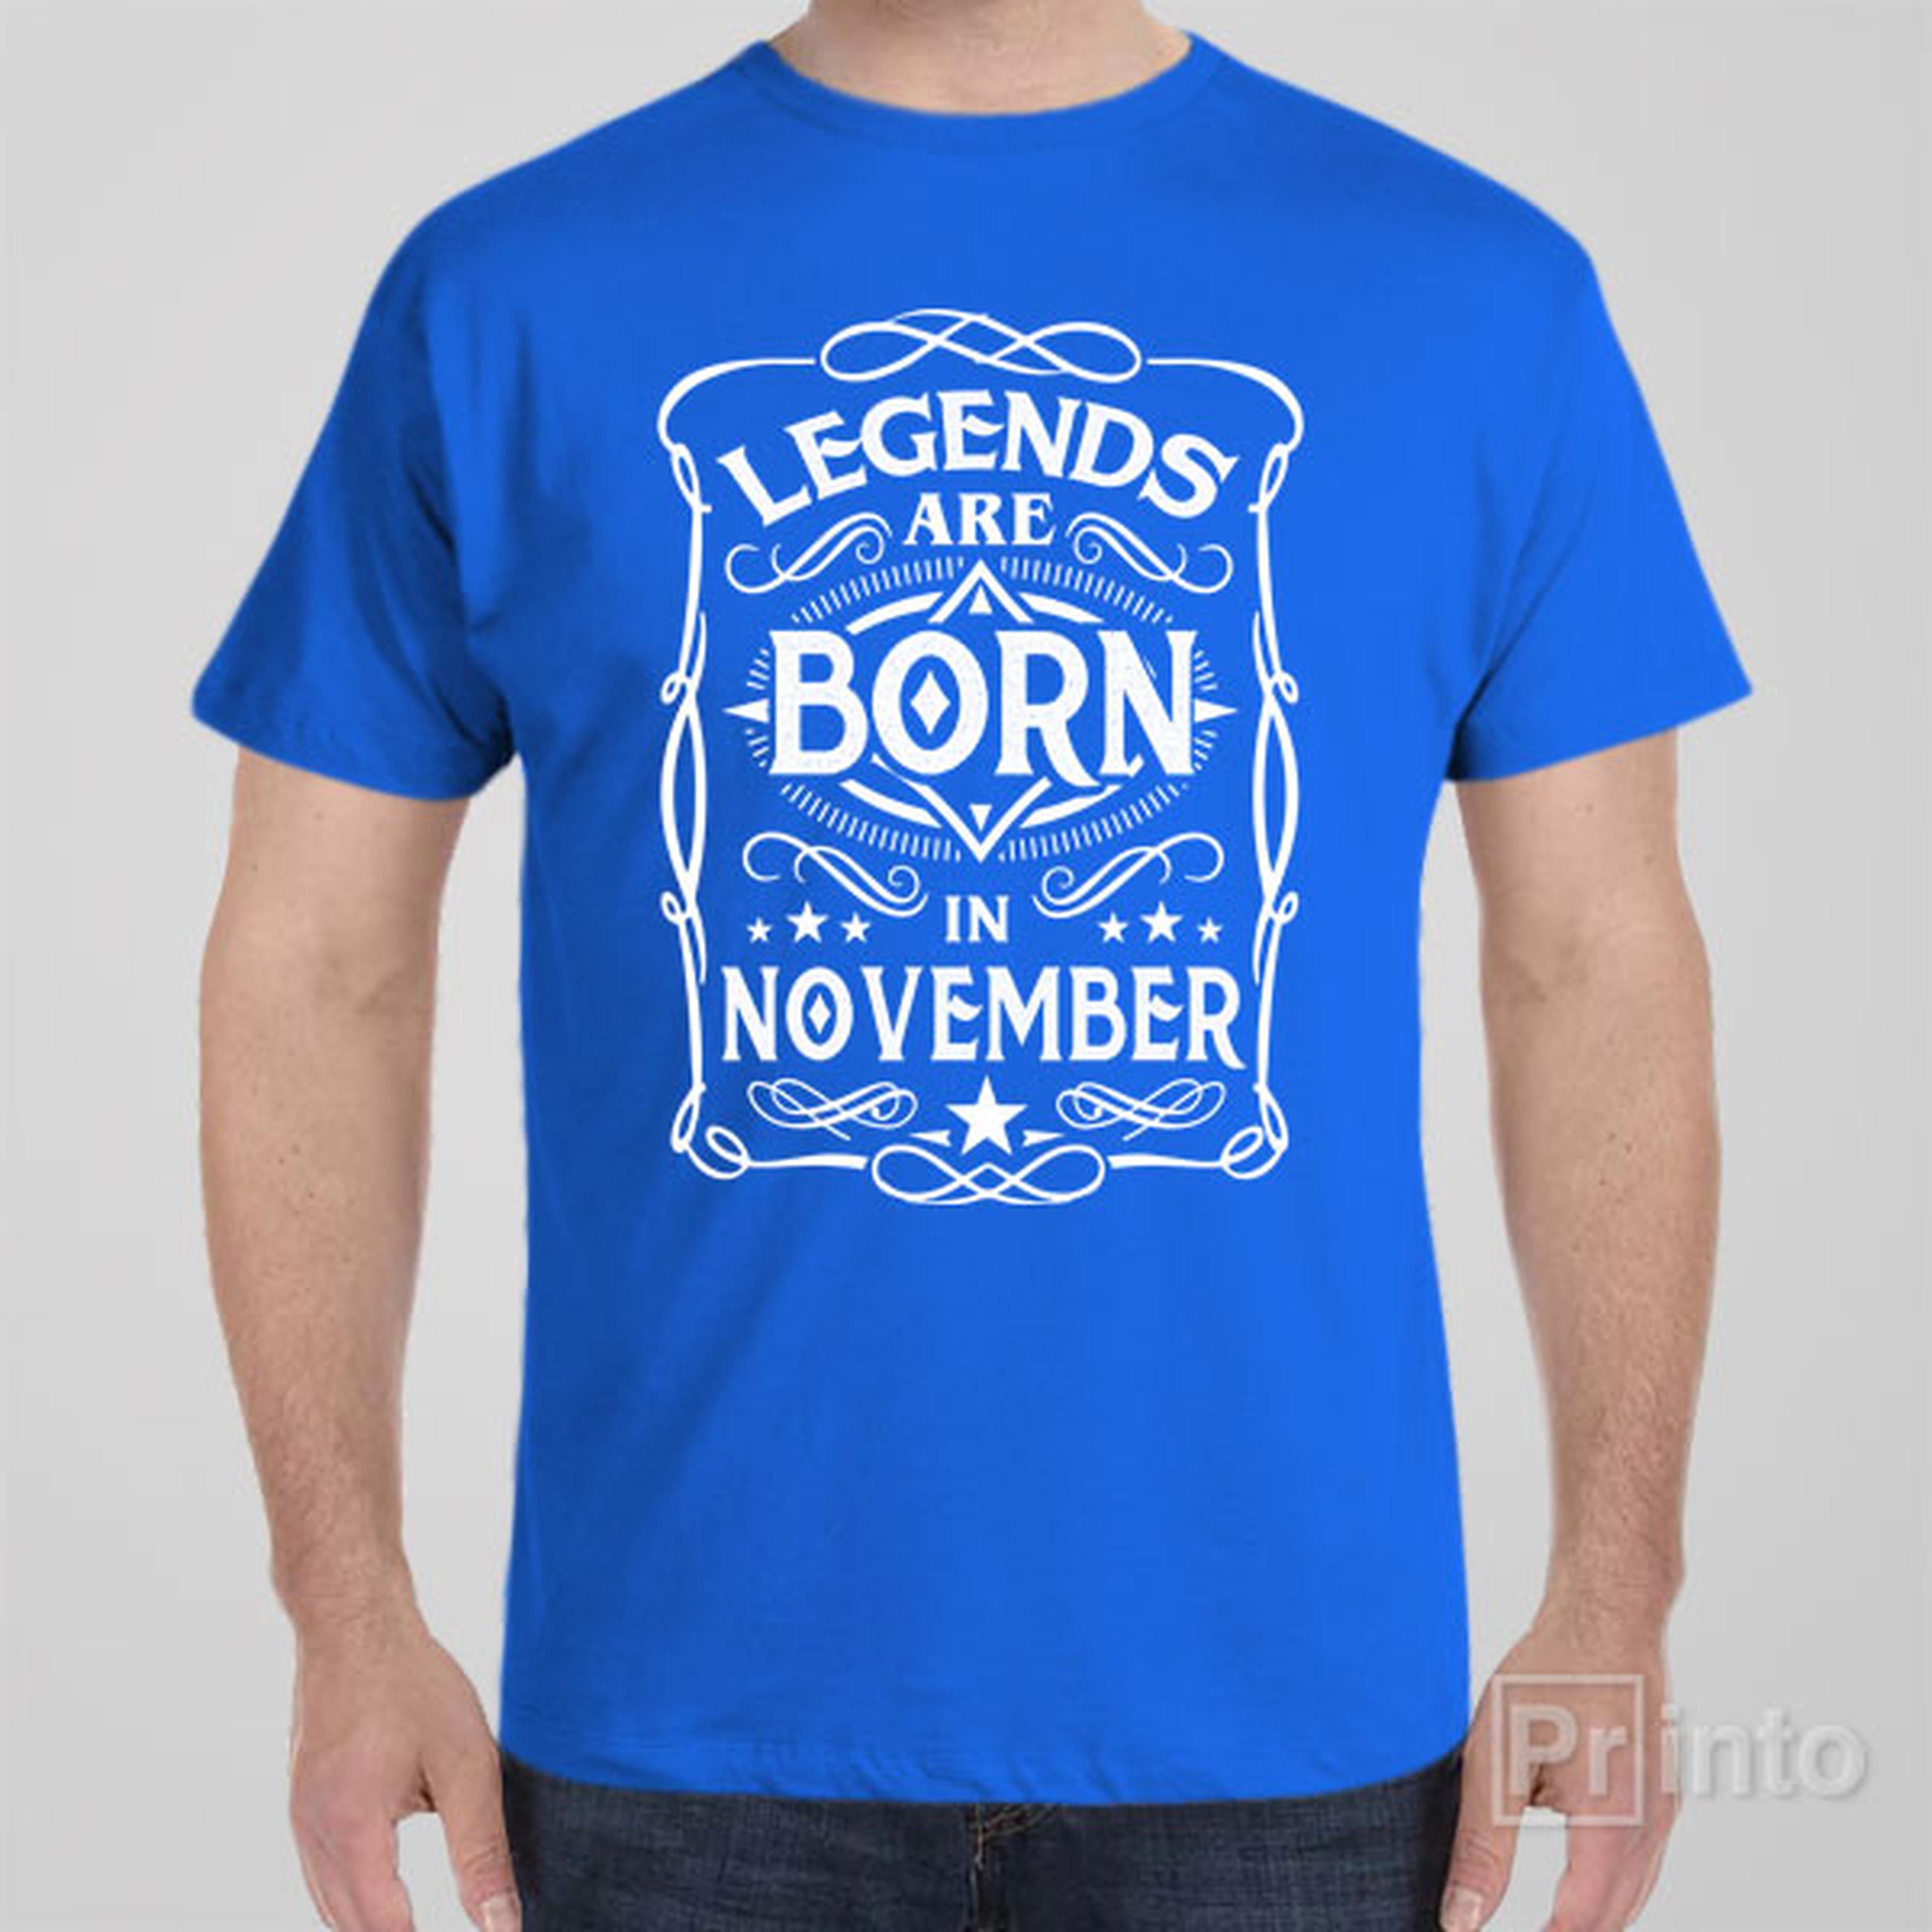 legends-are-born-in-november-t-shirt